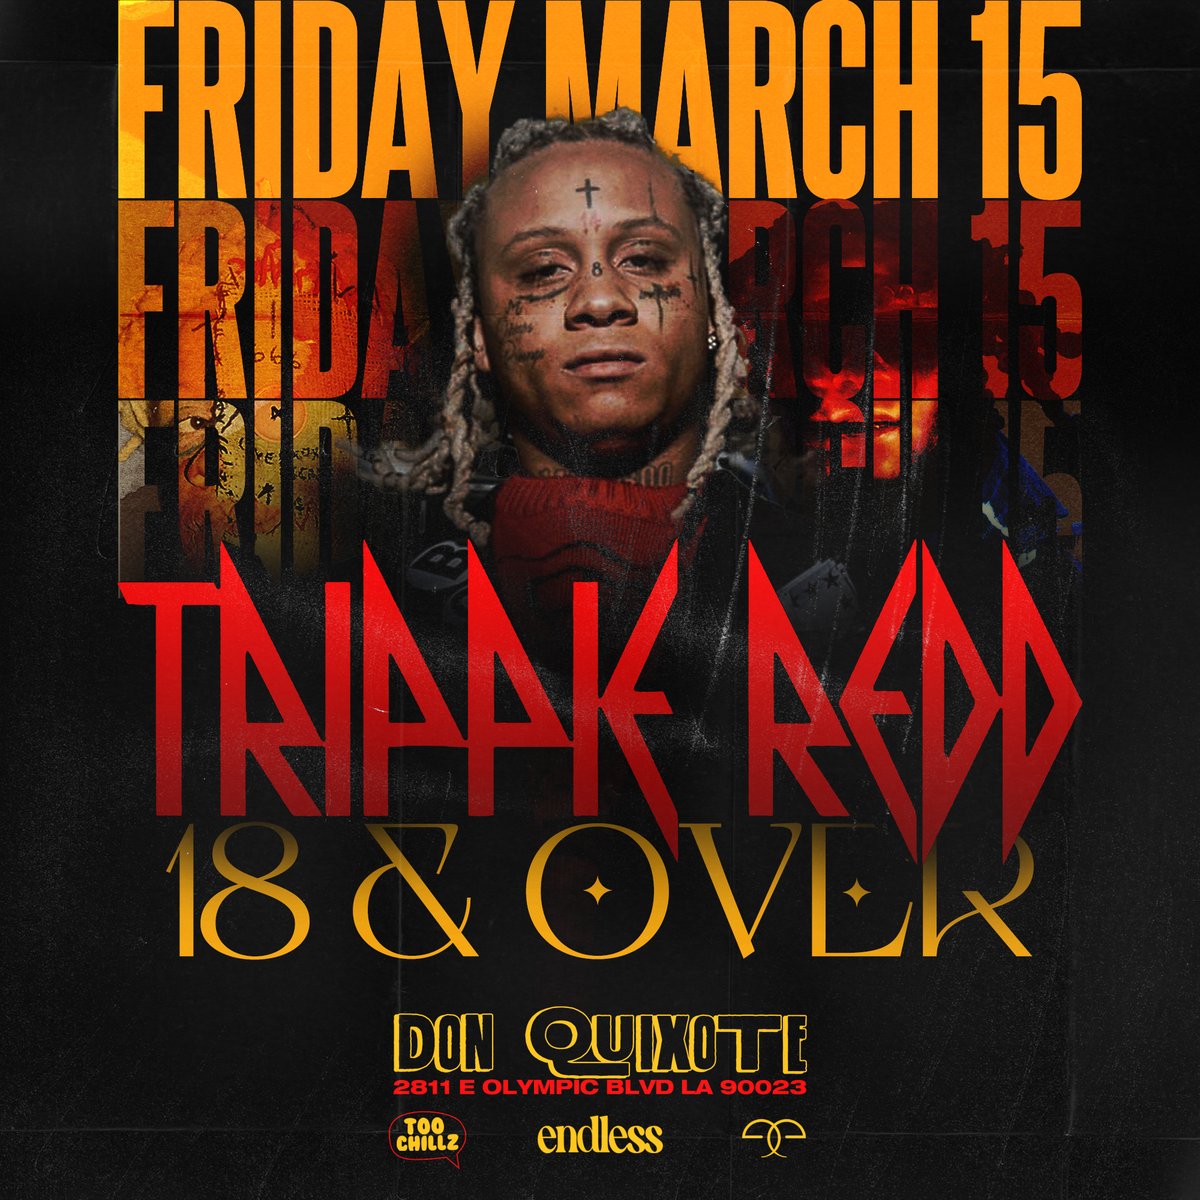 📣 Los Angeles!! Don’t miss your chance to party with @trippieredd at Don Quixote 😎 🎟️Tickets on sale now Fri March 15th // 9pm // 18+ #donquixotela #trippieredd #trippiereddla